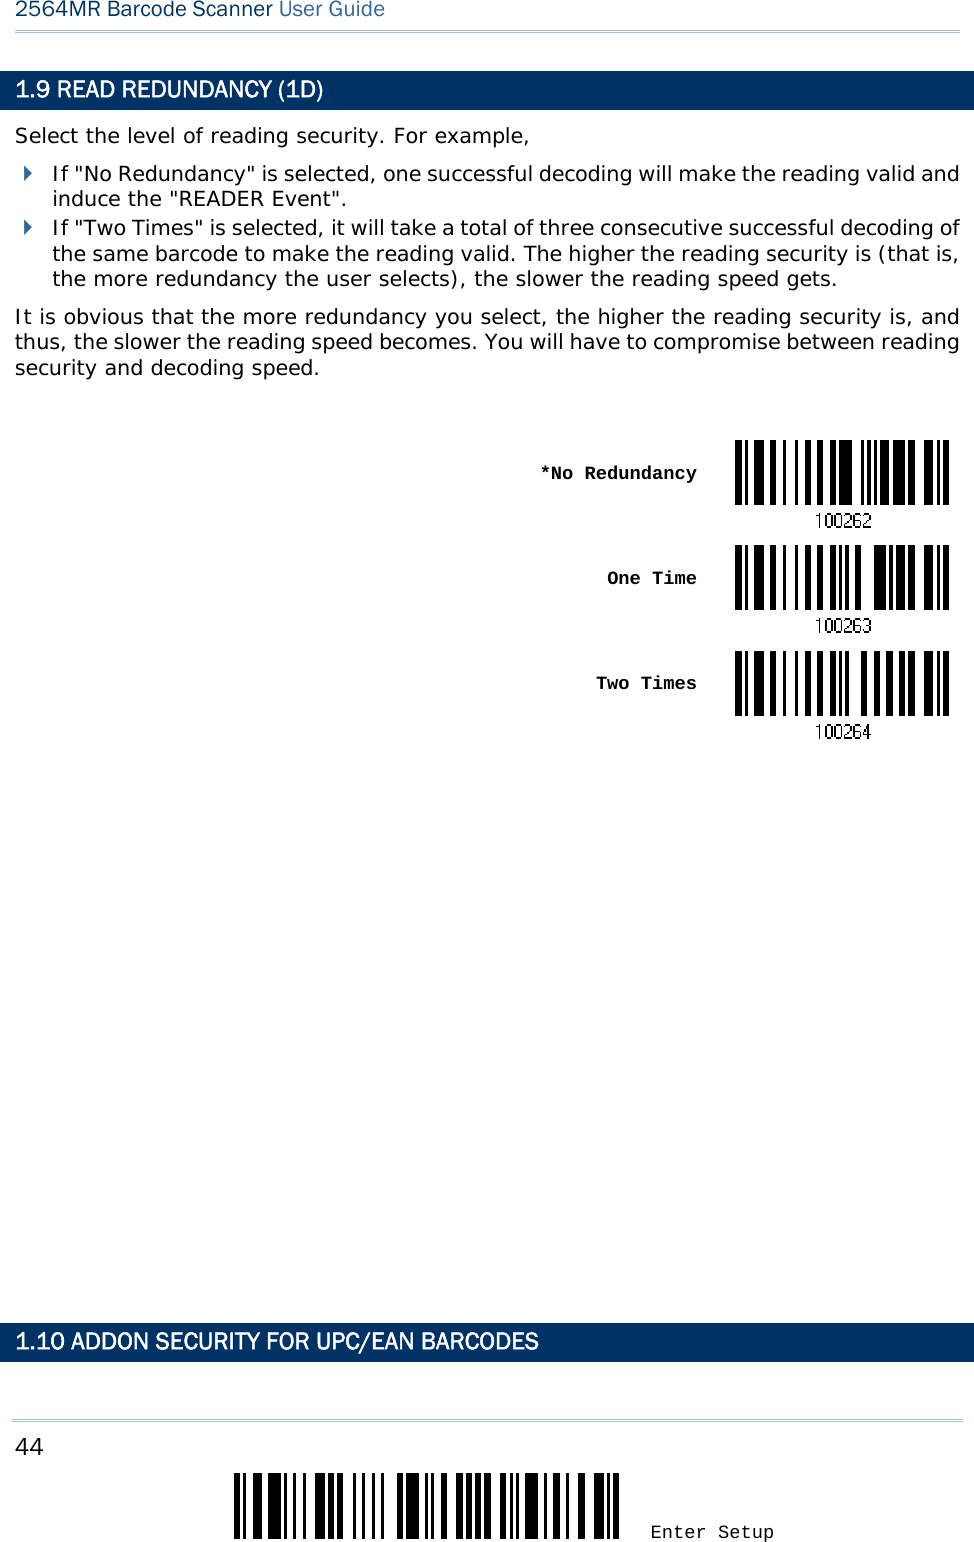 44 Enter Setup 2564MR Barcode Scanner User Guide  1.9 READ REDUNDANCY (1D) Select the level of reading security. For example,  If &quot;No Redundancy&quot; is selected, one successful decoding will make the reading valid and induce the &quot;READER Event&quot;.  If &quot;Two Times&quot; is selected, it will take a total of three consecutive successful decoding of the same barcode to make the reading valid. The higher the reading security is (that is, the more redundancy the user selects), the slower the reading speed gets.  It is obvious that the more redundancy you select, the higher the reading security is, and thus, the slower the reading speed becomes. You will have to compromise between reading security and decoding speed.   *No Redundancy One Time Two Times                          1.10 ADDON SECURITY FOR UPC/EAN BARCODES 